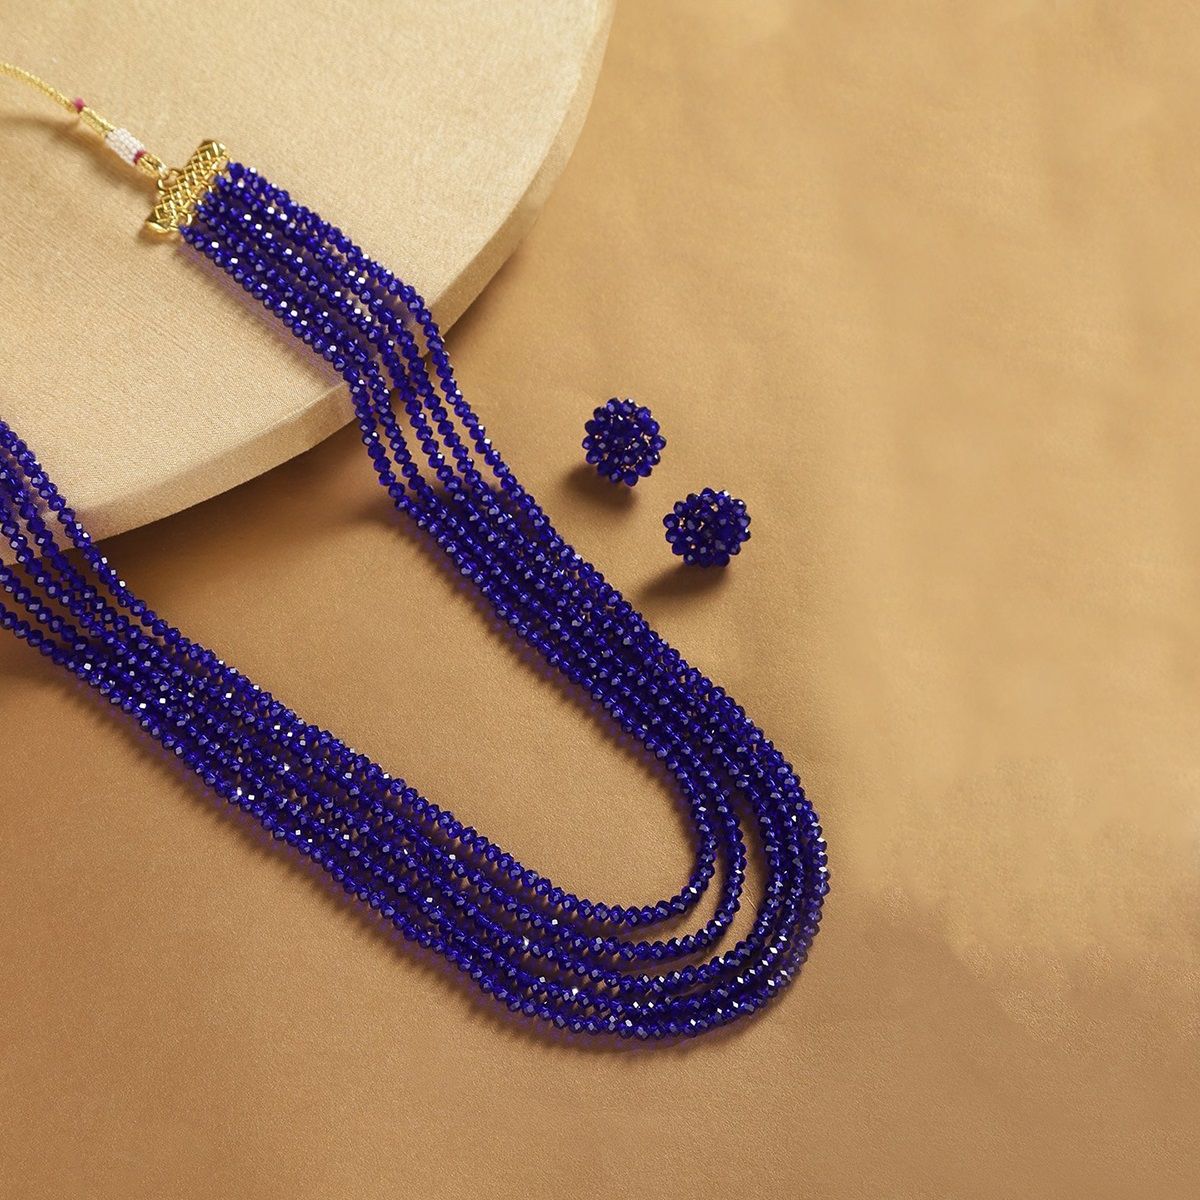 2 Layer Pearlish Metallic Finish Glass Beads Necklace With Pendant, Royal  Blue